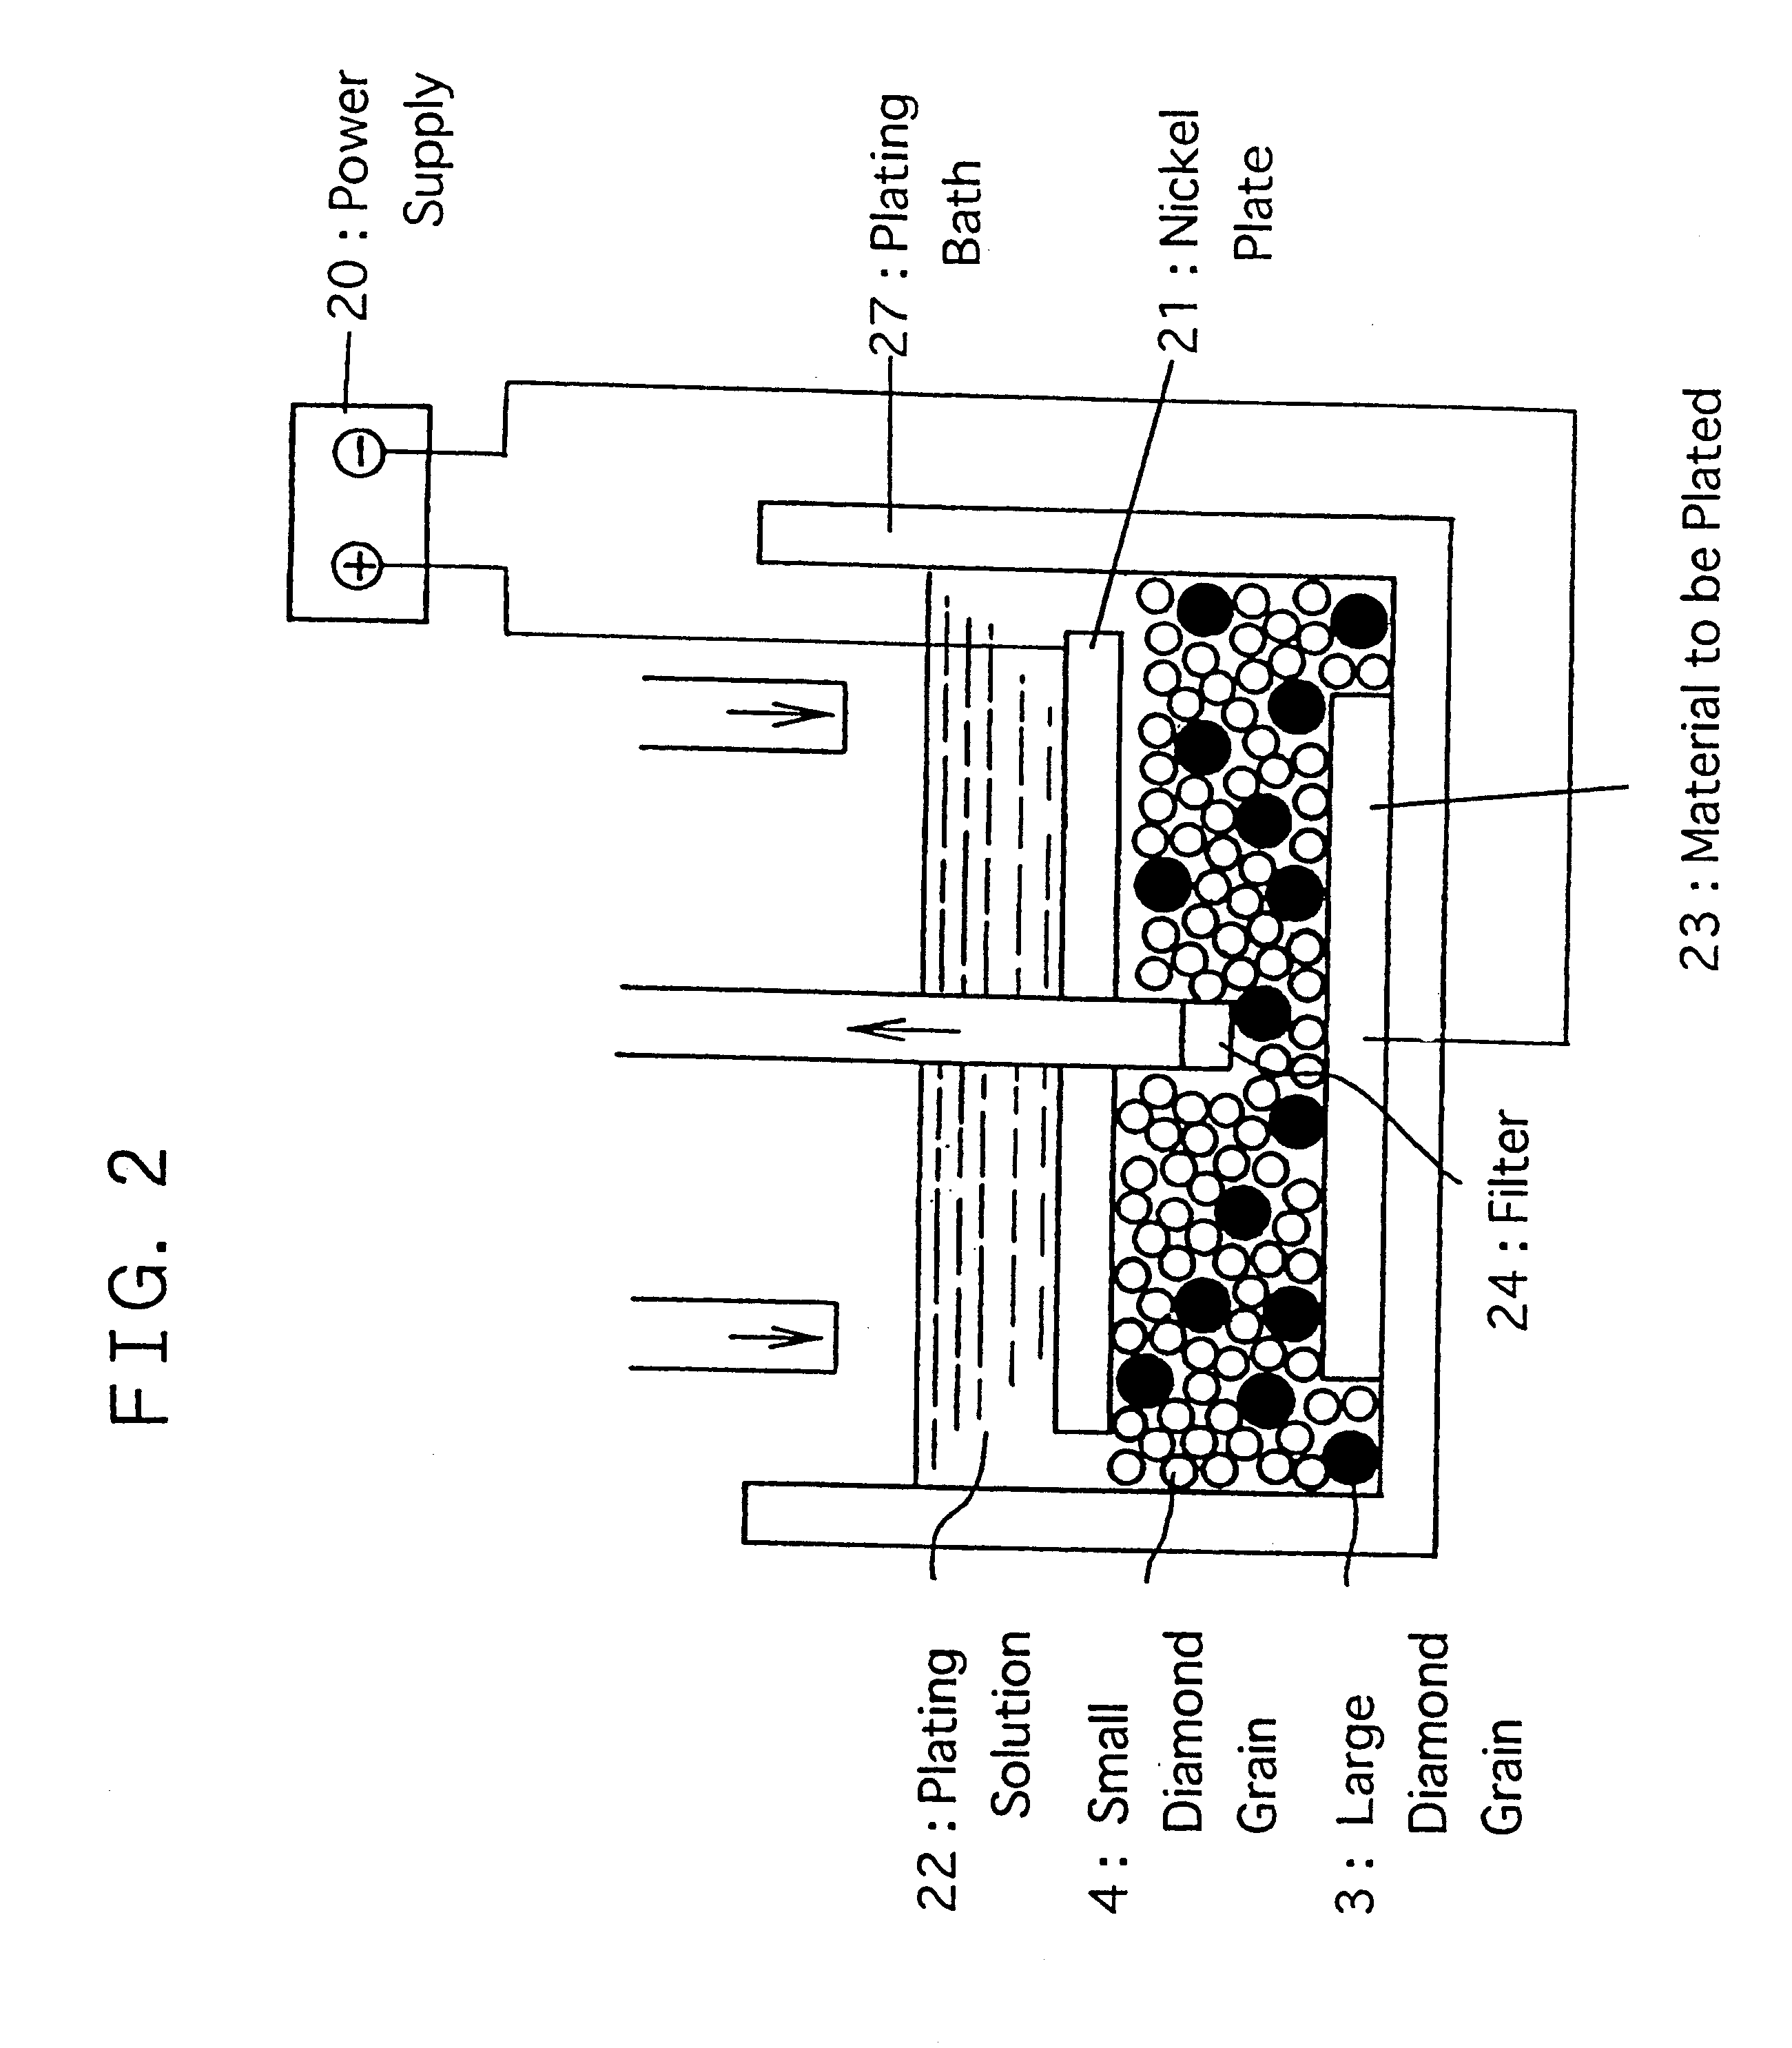 Dressing tool for the surface of an abrasive cloth and its production process